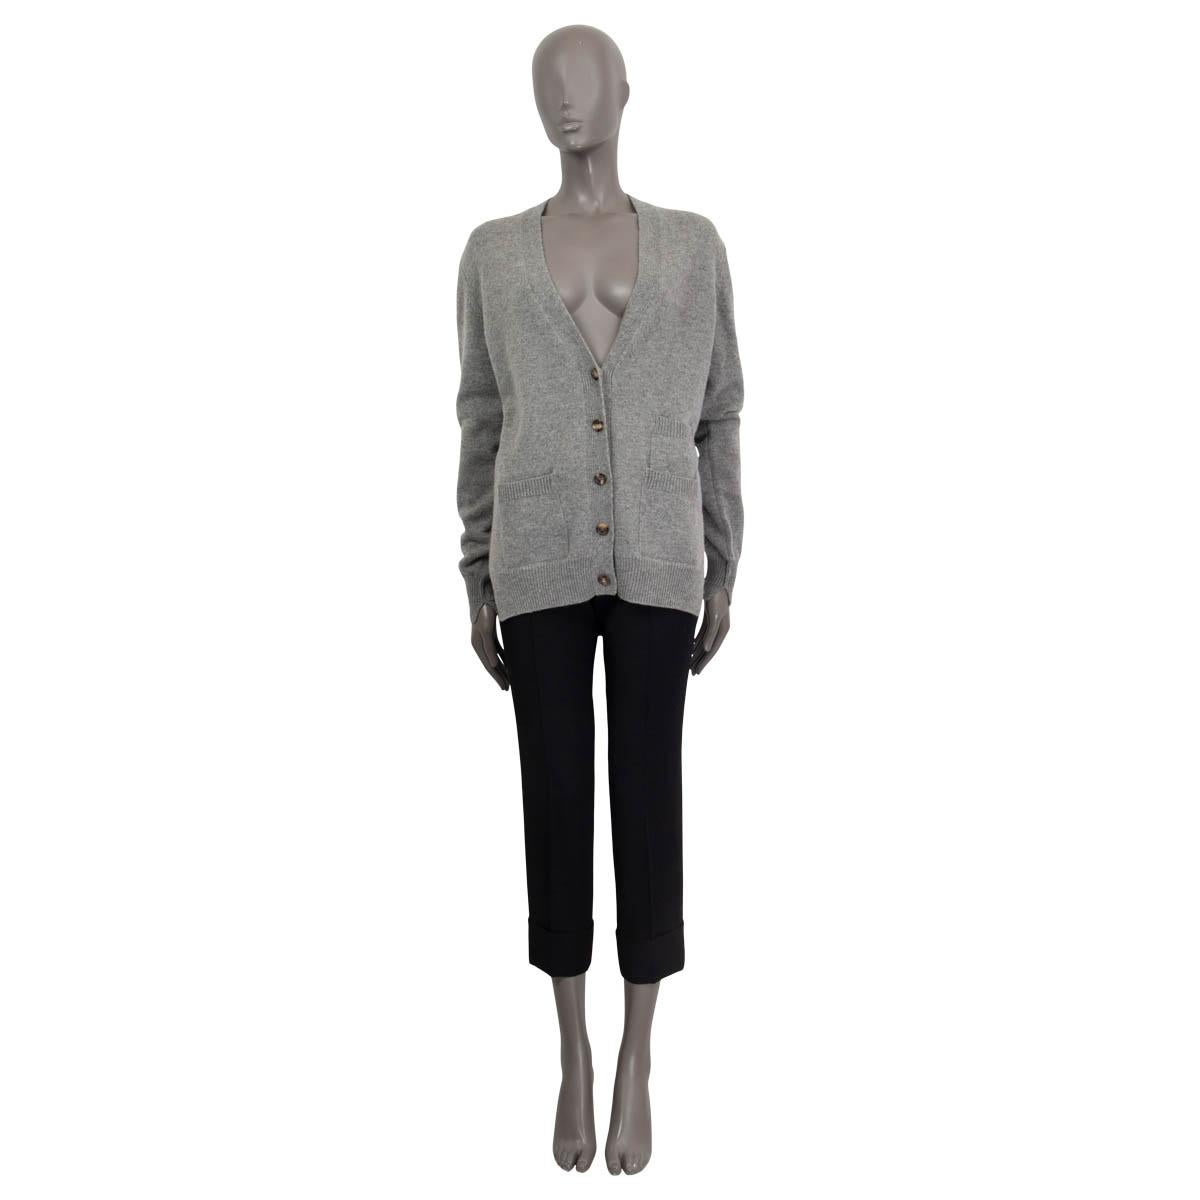 100% authentic Céline long sleeve cardigan in light gray cashmere (100%). Features three patch pockets on the front and a deep v-neck. Opens with five buttons on the front. Unlined. Has been worn and is in excellent condition. 

Measurements
Tag